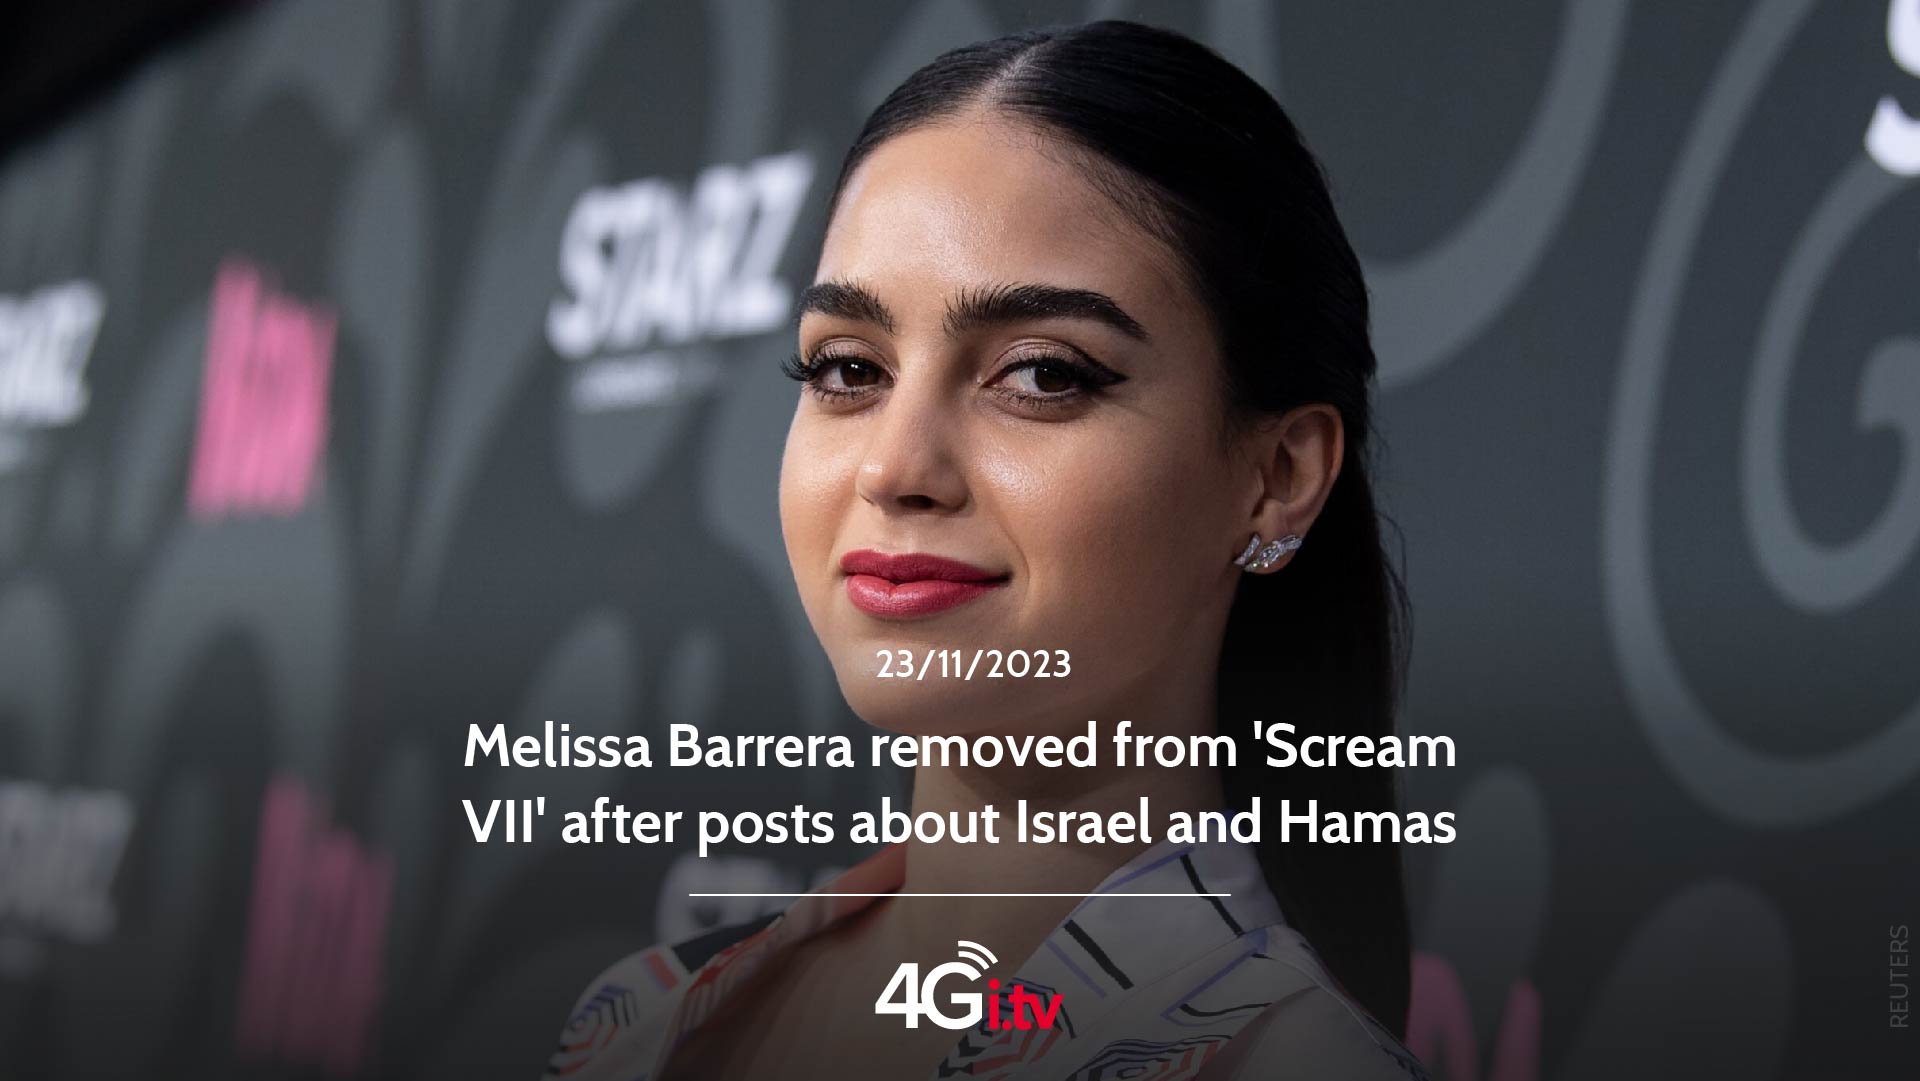 Подробнее о статье Melissa Barrera removed from ‘Scream VII’ after posts about Israel and Hamas